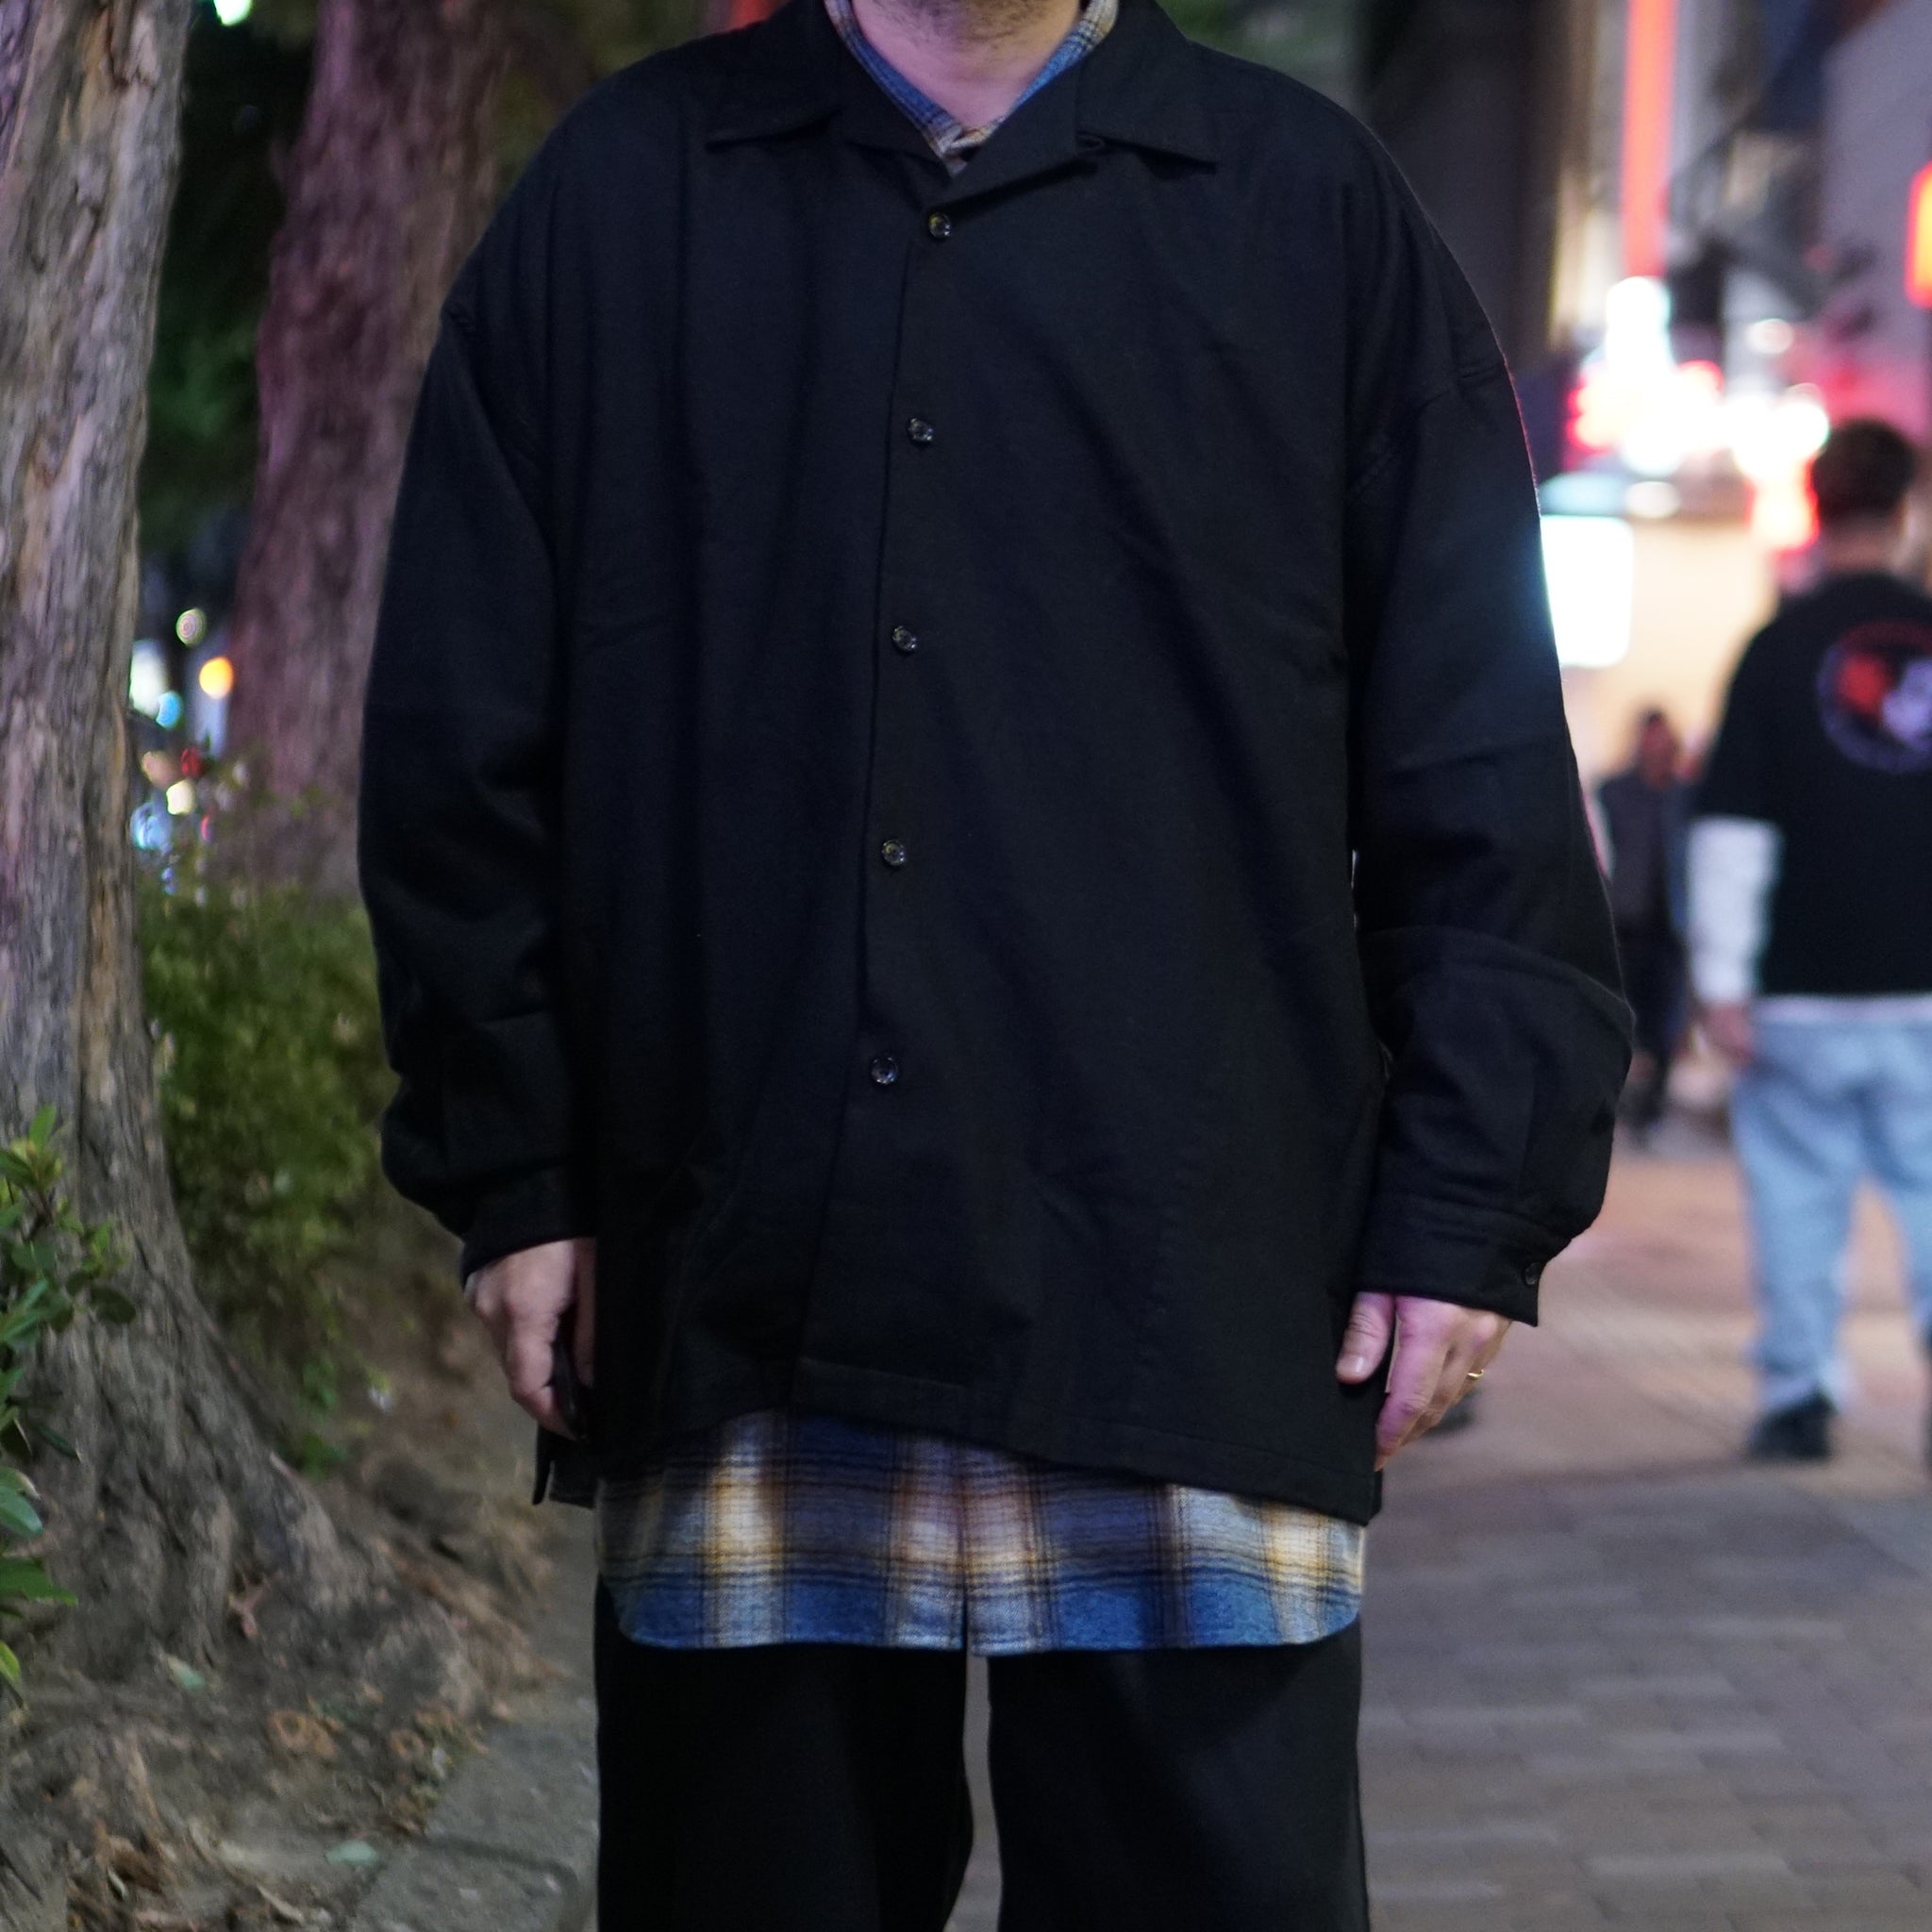 No:2023aw-OP-02 | Name:OPEN COLLAR SHIRT-WOOL FLANNEL | Color:Black【CATTA_カッタ】